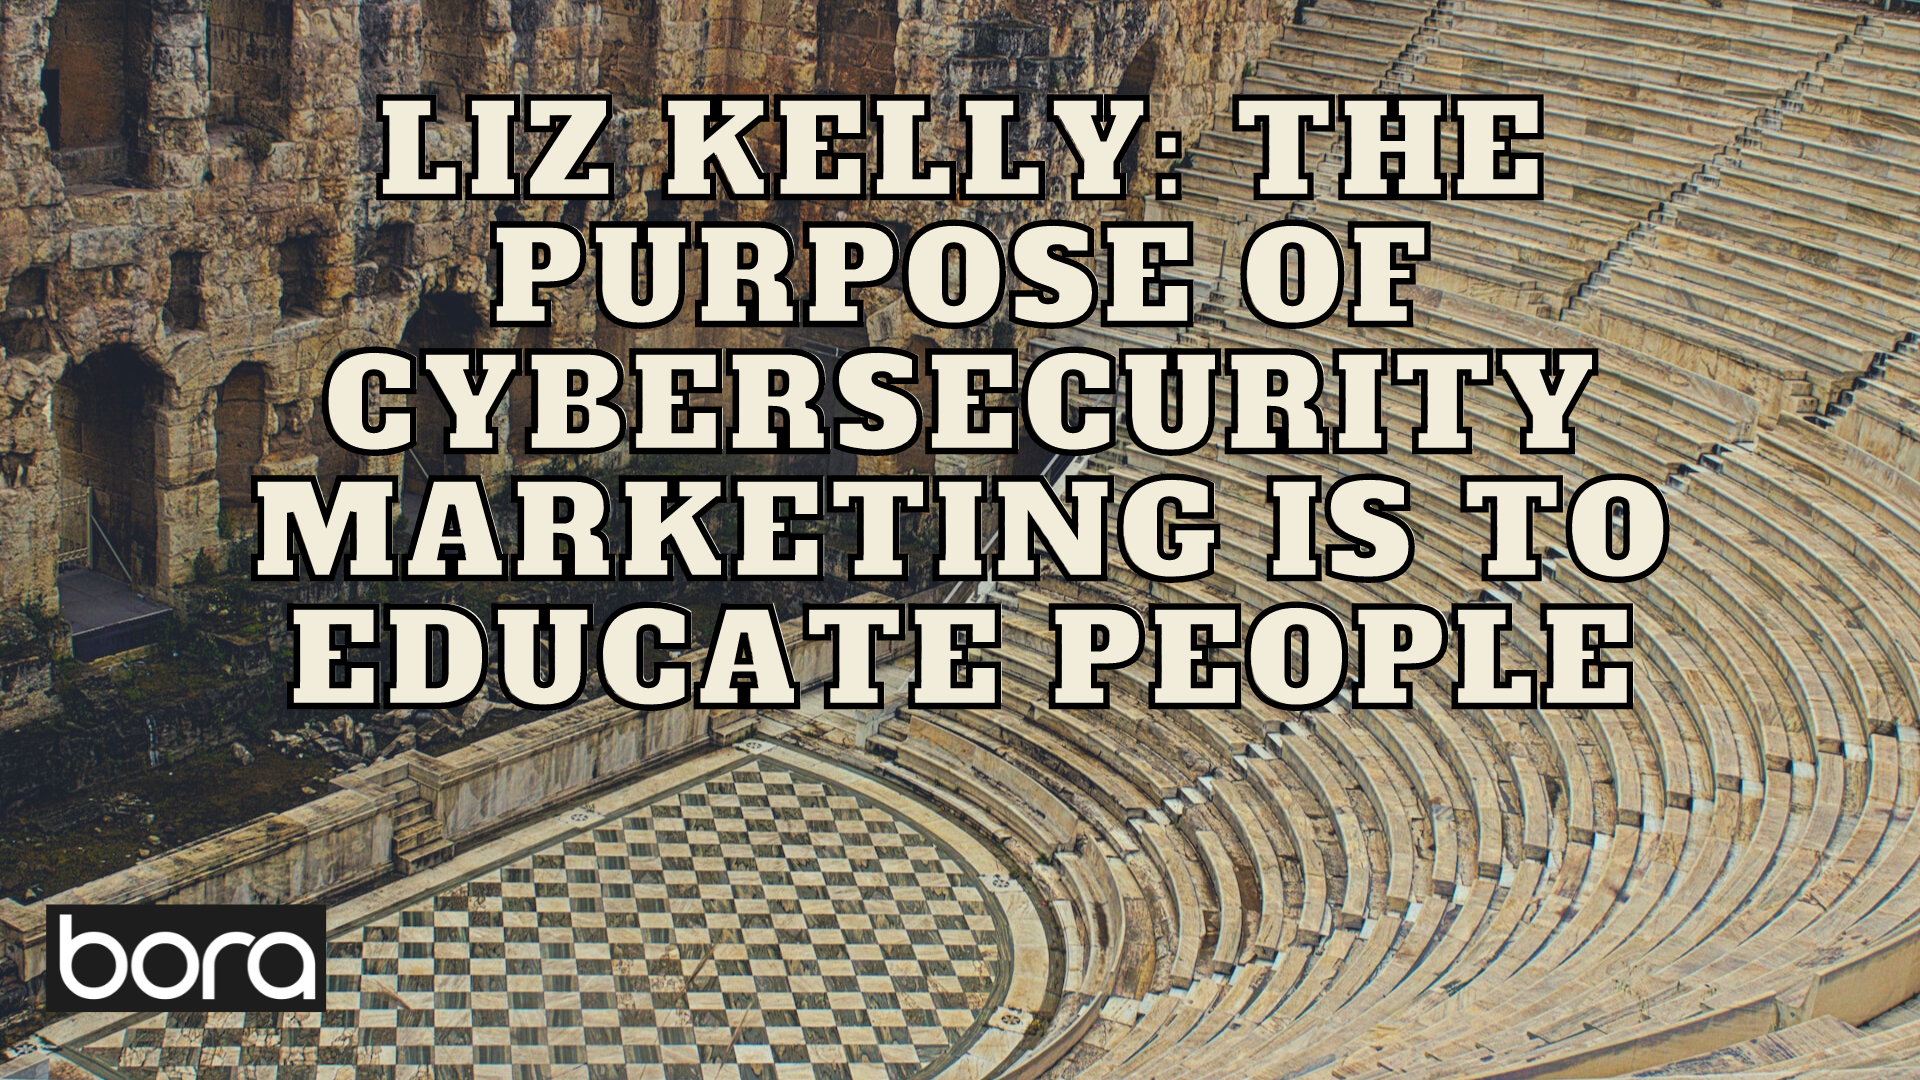 Liz Kelly: The purpose of cybersecurity marketing is to educate people